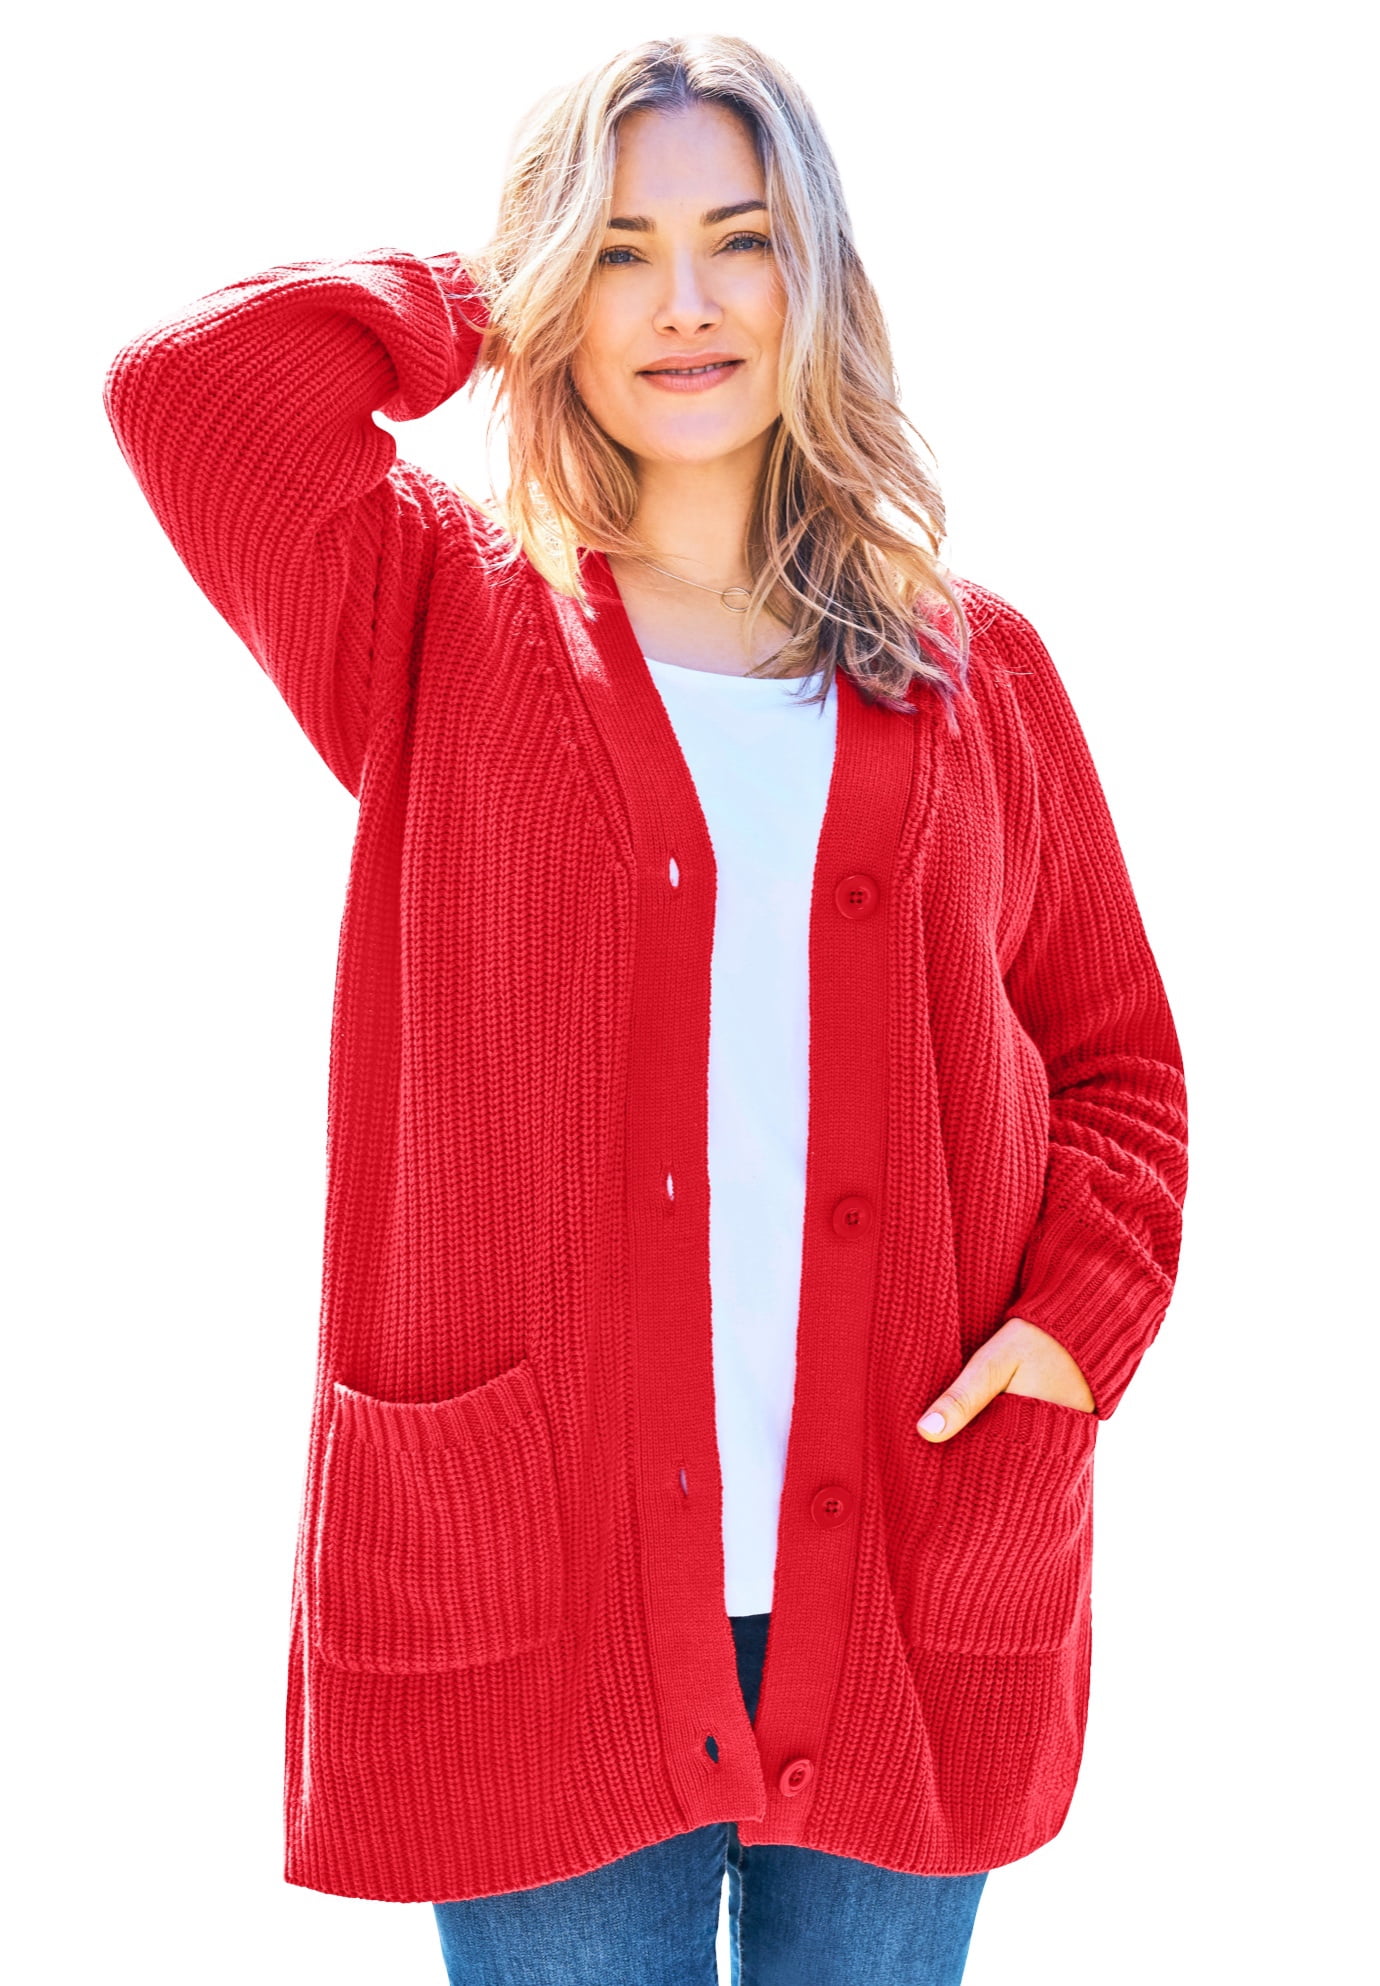 Fluffy Cardigans for Women Womens Cardigan Sweaters Plus Size Halloween  Sweater Short Sleeve Cardigans for Women 1 Items one Dollar Items only 1.00 Dollar  Items Cheap Womens Clothes Under 1 Dollars at